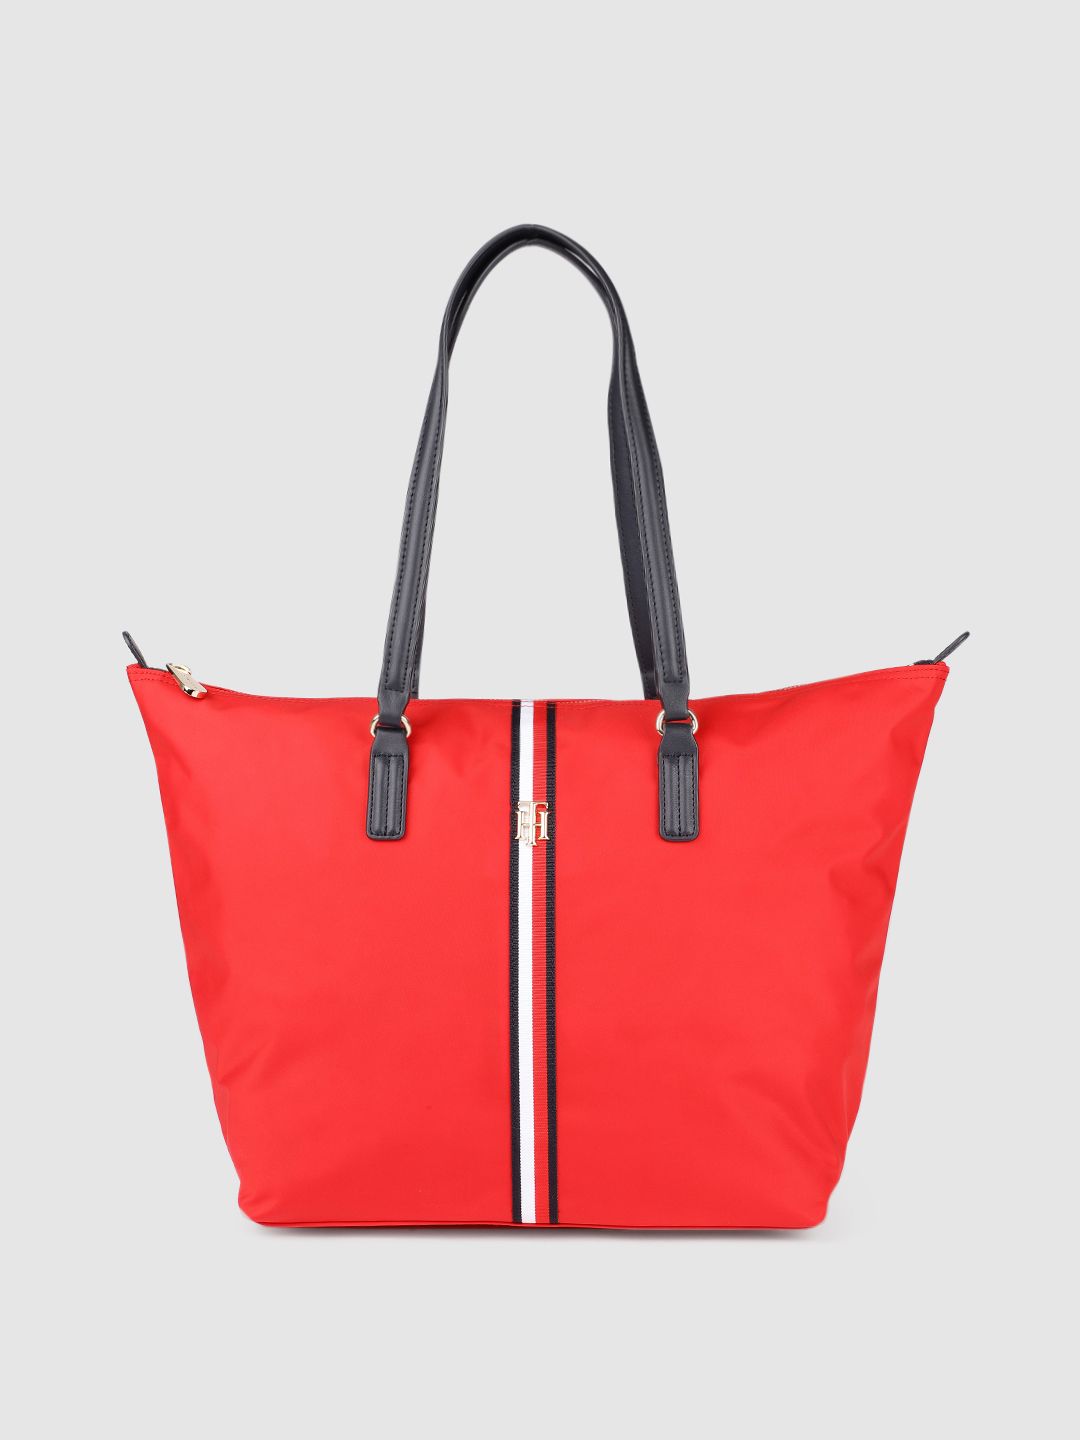 Tommy Hilfiger Red Solid Structured Tote Bag Price in India